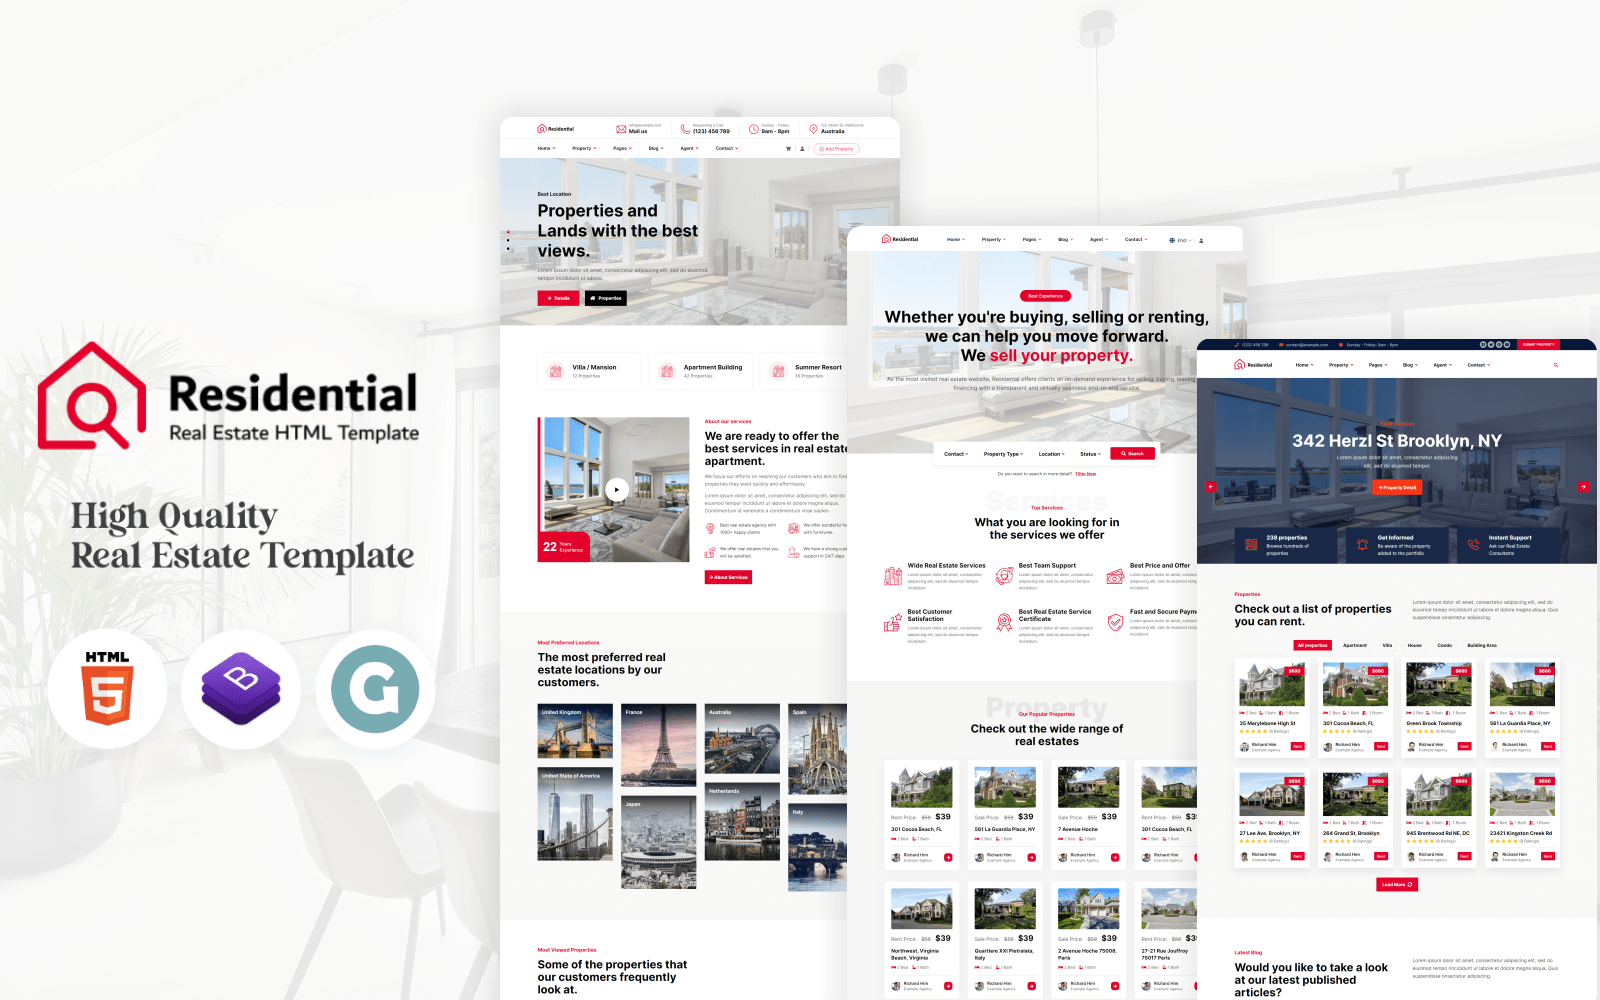 Residential – Real Estate HTML Template